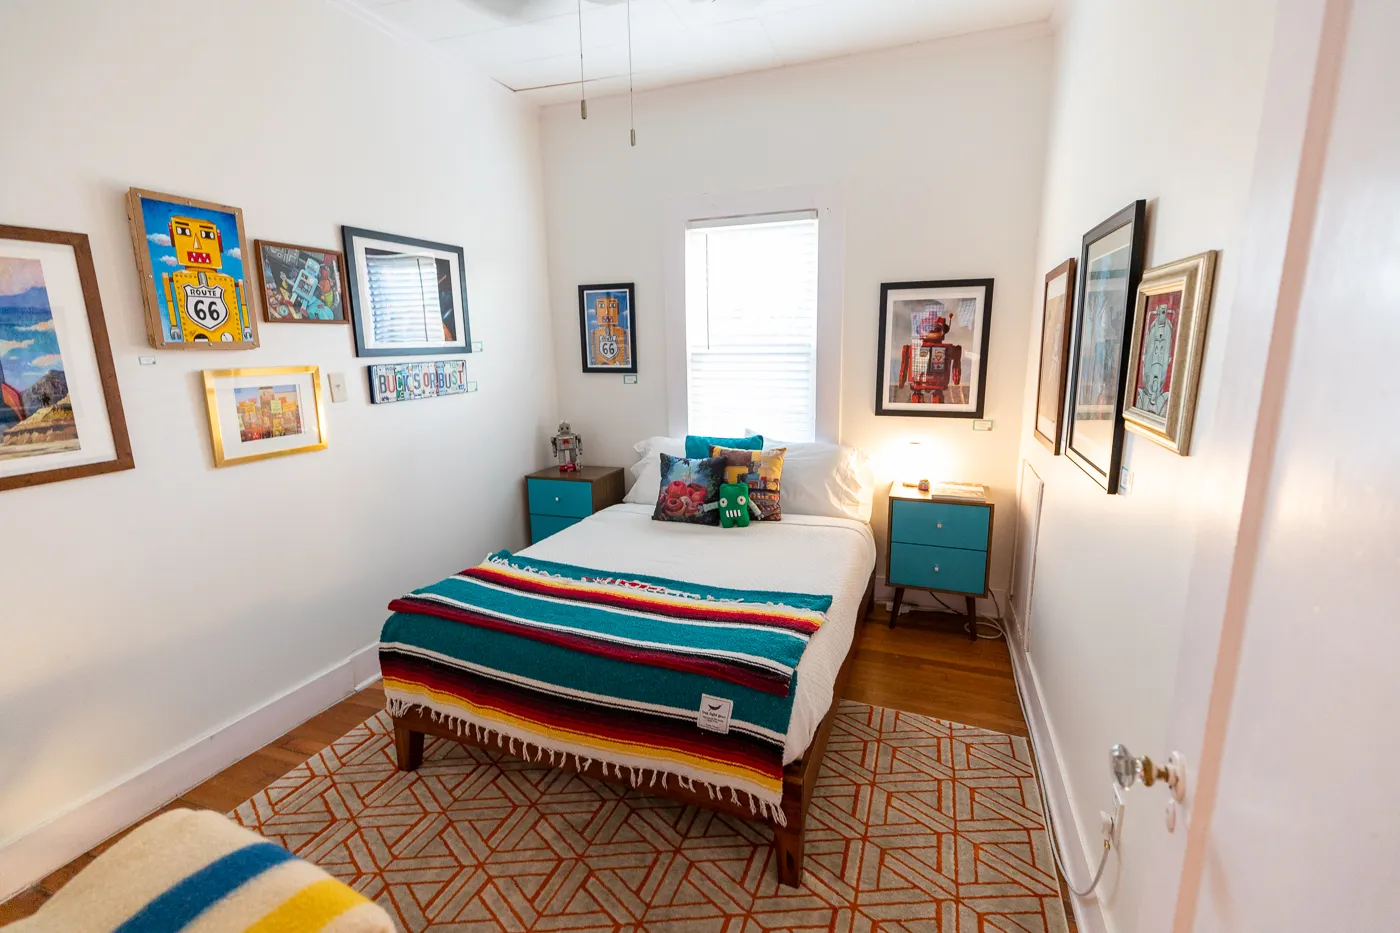 Single bedroom at Buck's Cosmic Crash Pad on Route 66 - Route 66 AirBNB in Tulsa, Oklahoma